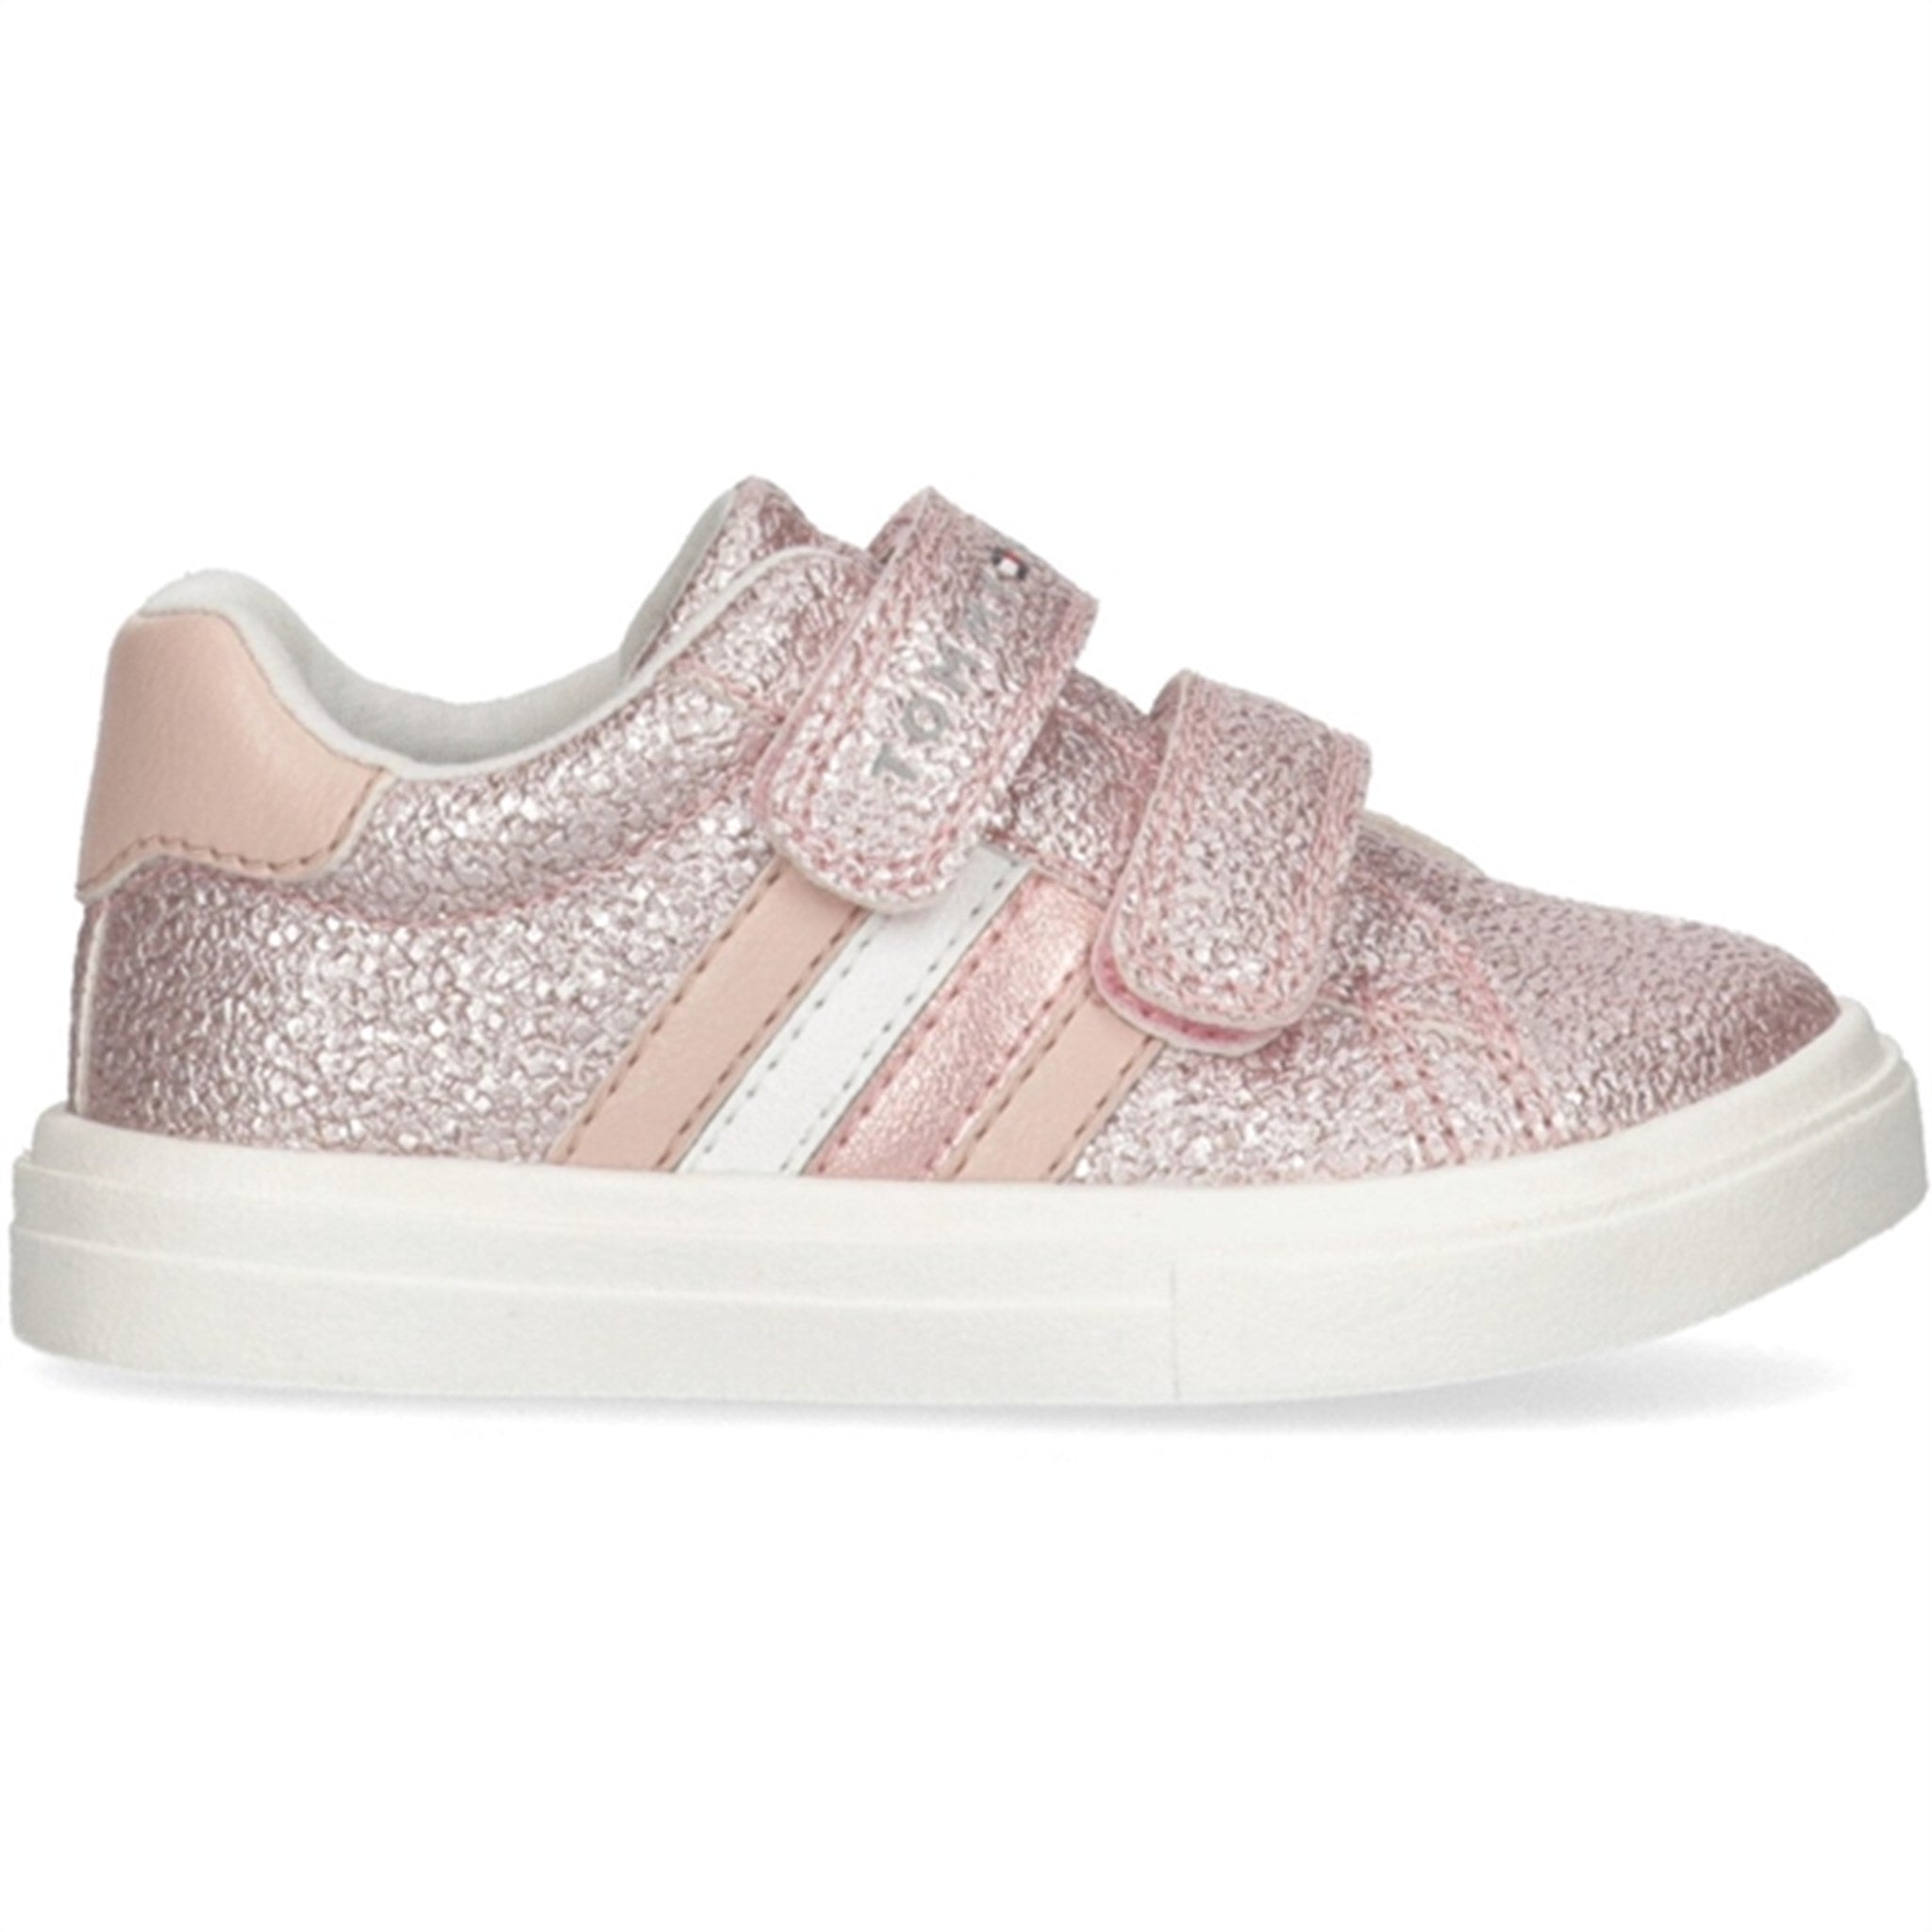 Tommy Hilfiger Stripes Low Cut Velcro Sneakers Pink 4